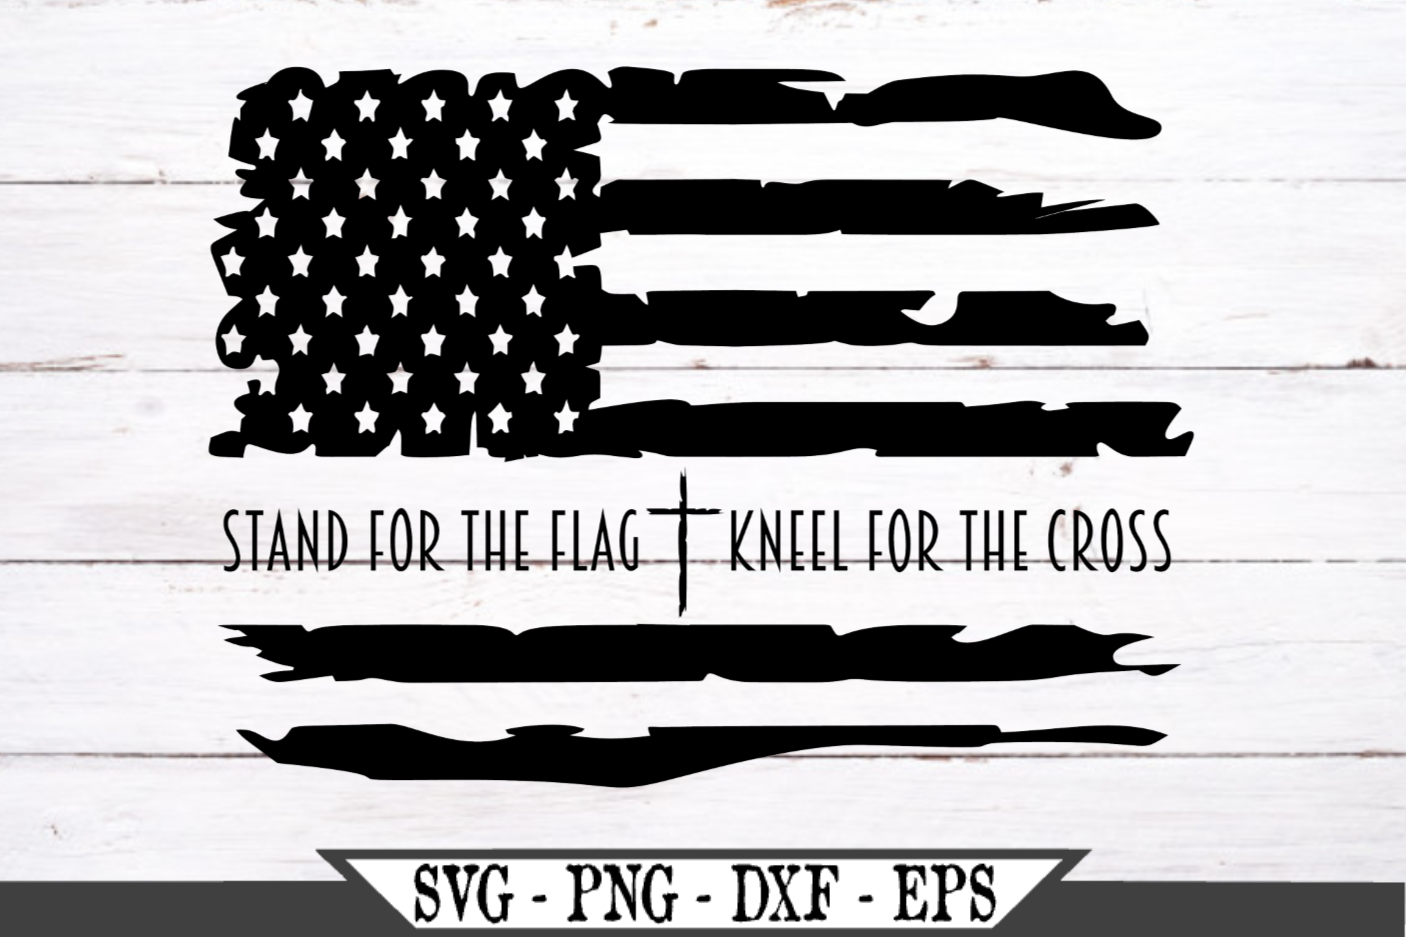 Stand For The Flag Kneel For The Cross Distressed Flag SVG (519341